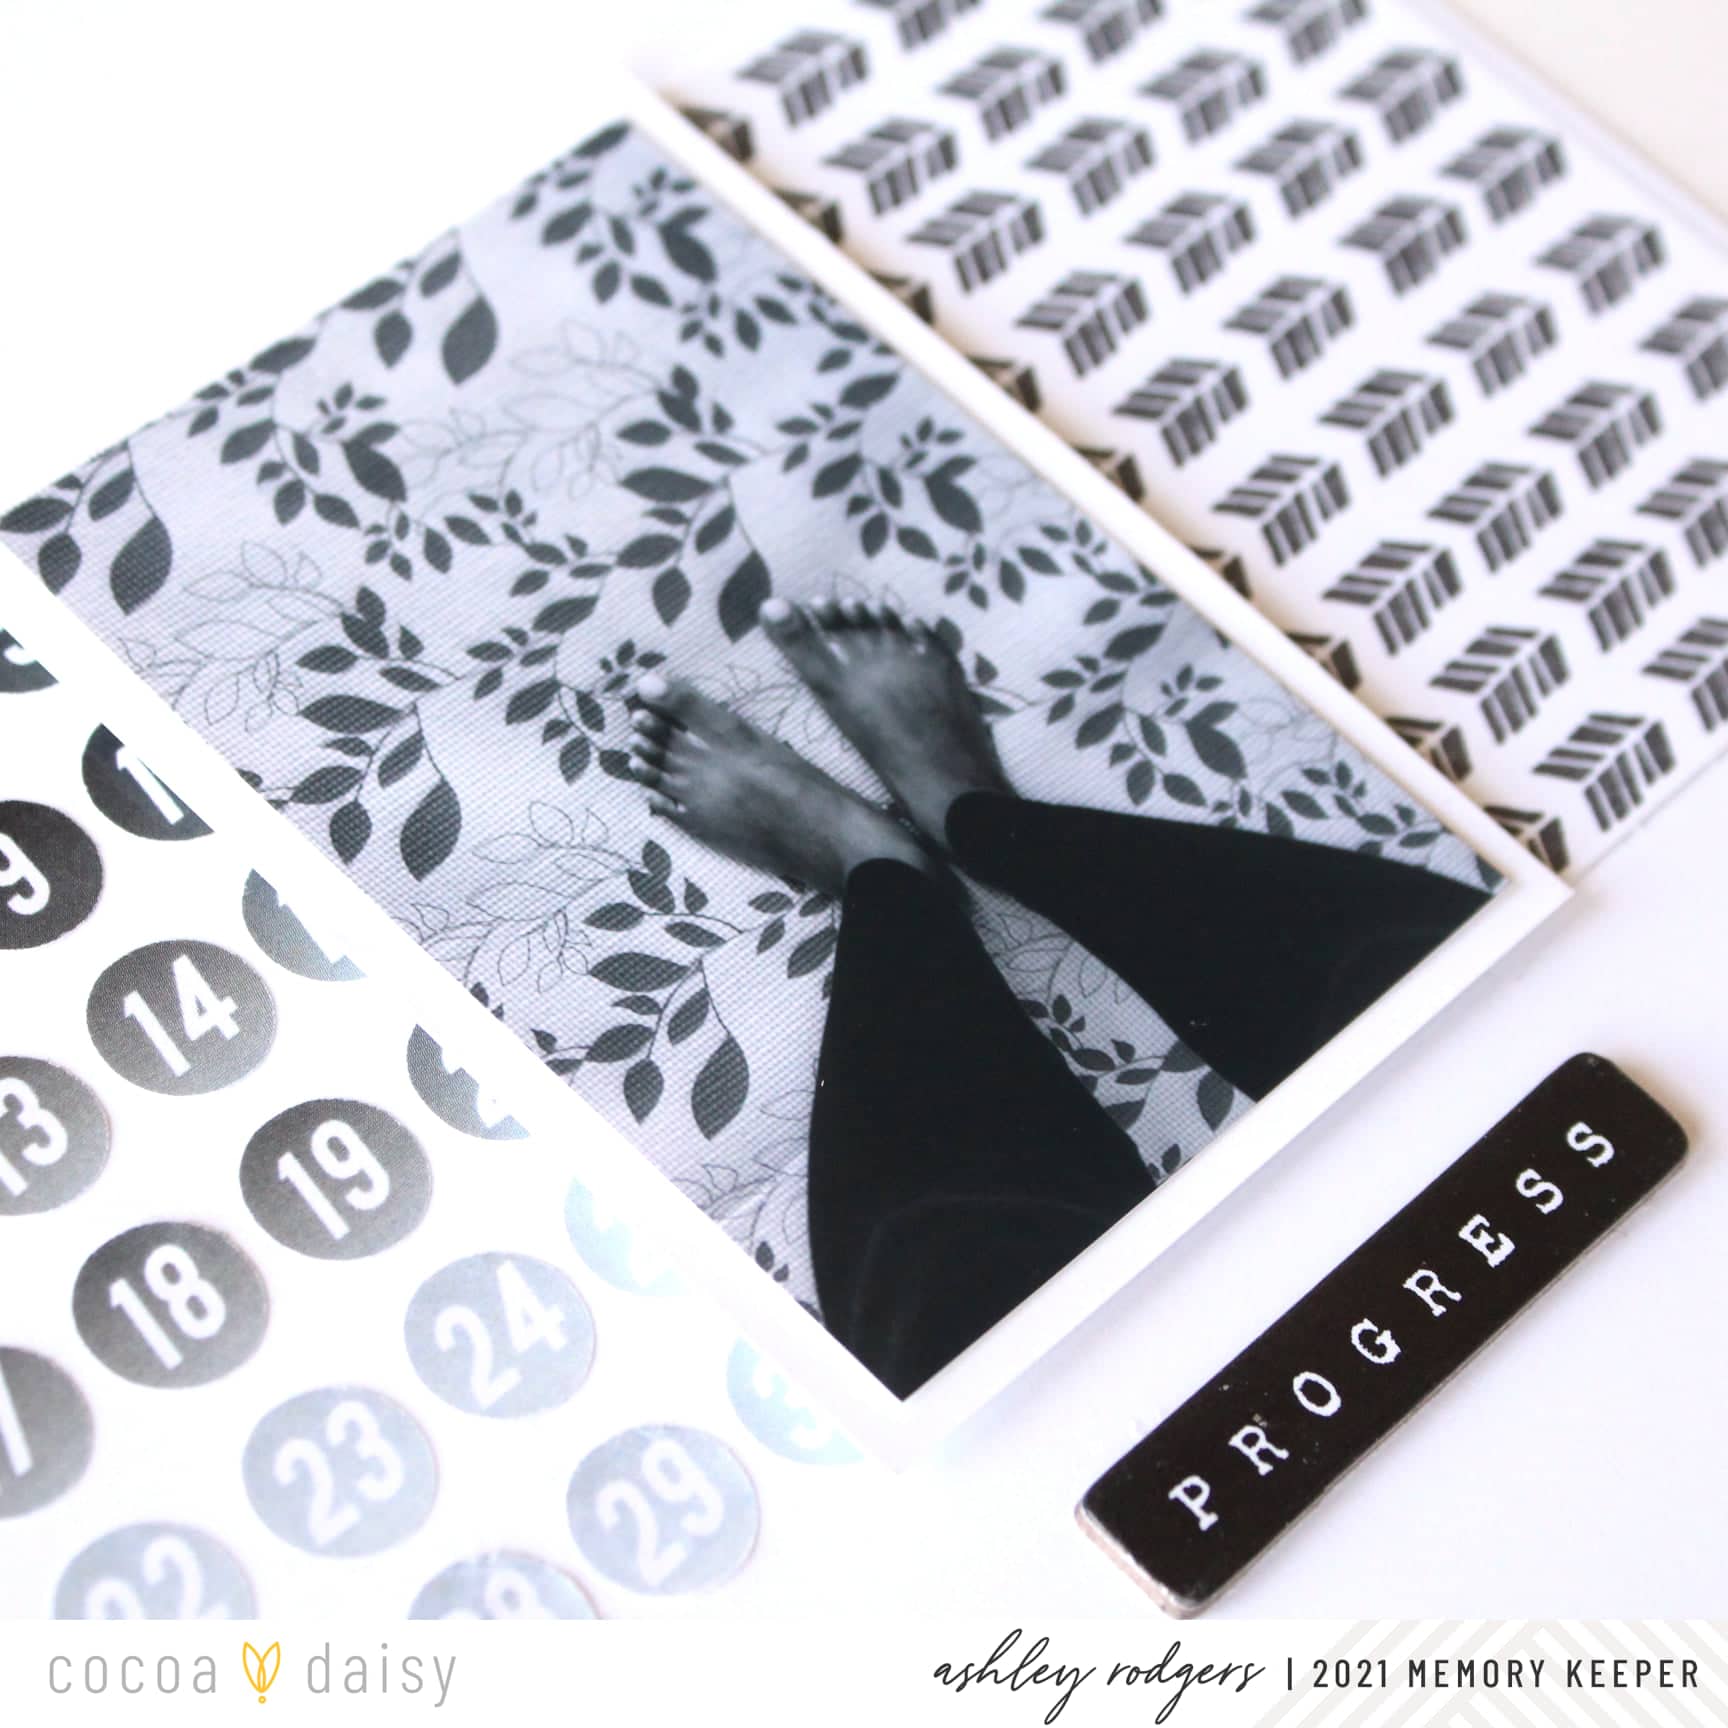 Combining Stamps and Stickers in Your Memory Keeping Designs